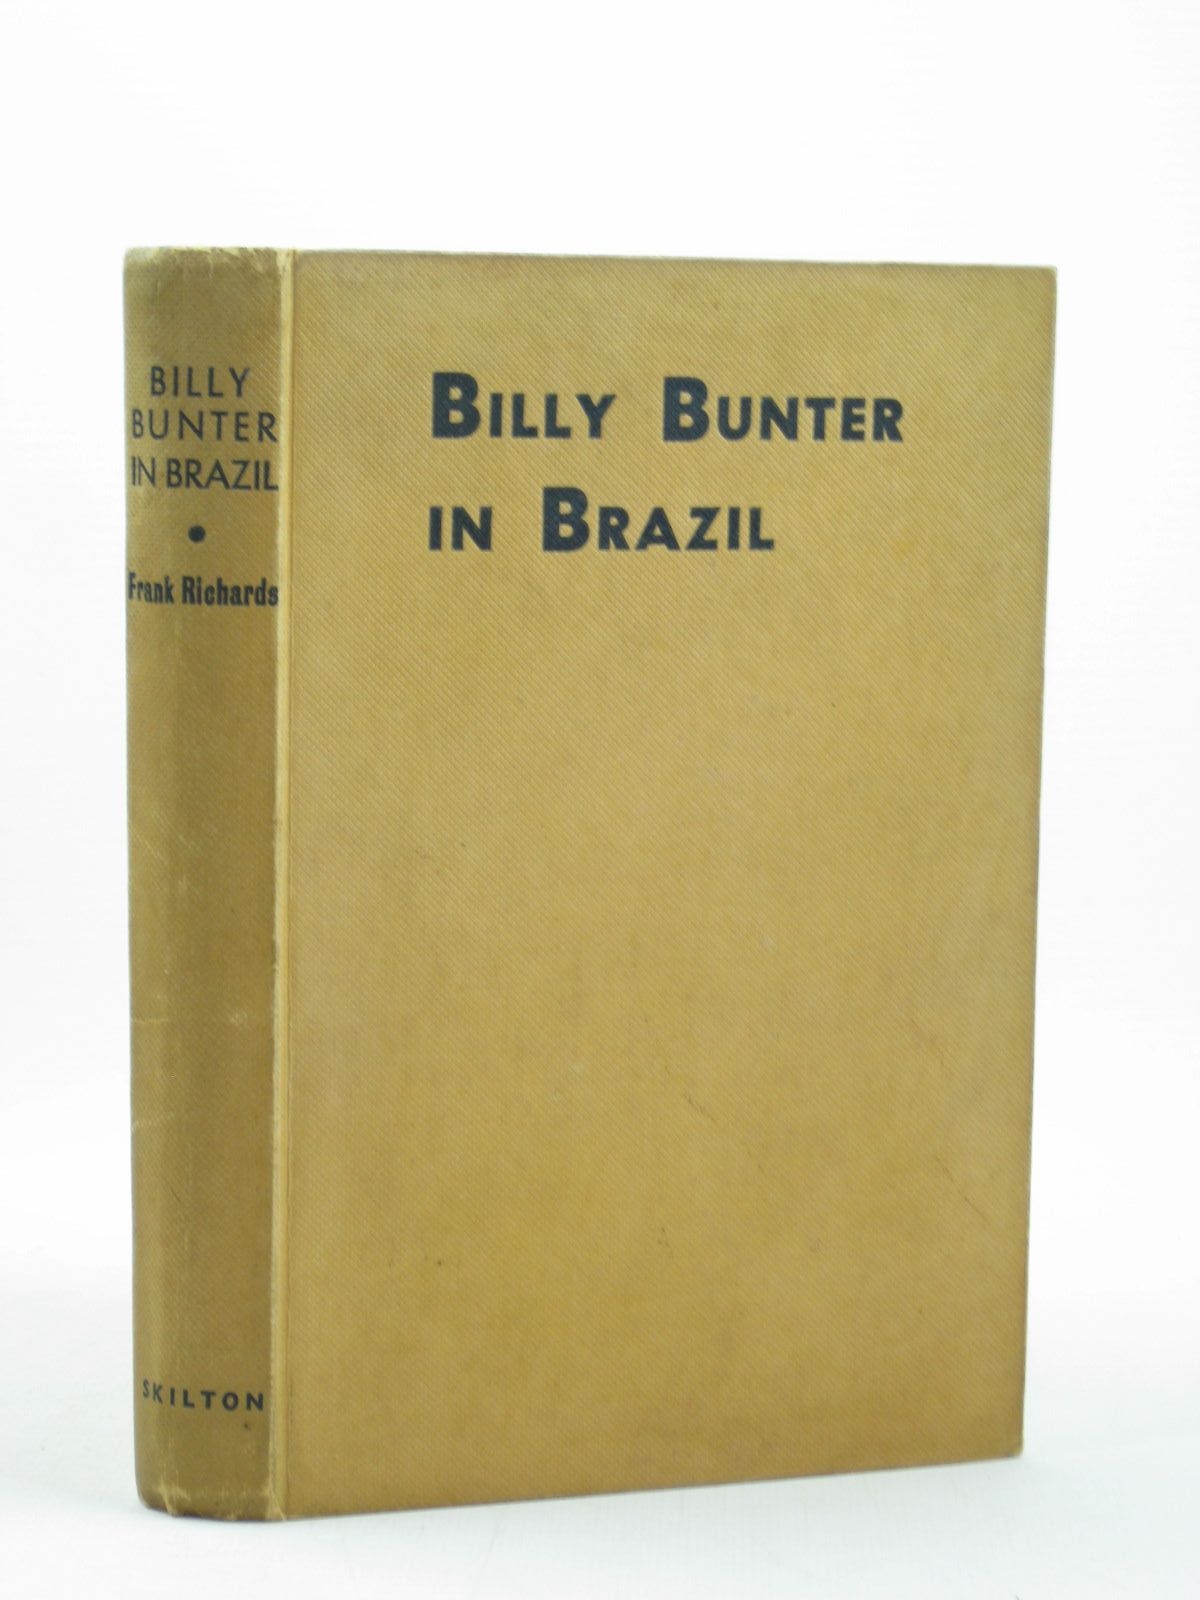 Photo of BILLY BUNTER IN BRAZIL written by Richards, Frank illustrated by Macdonald, R.J. published by Charles Skilton Ltd. (STOCK CODE: 1402396)  for sale by Stella & Rose's Books